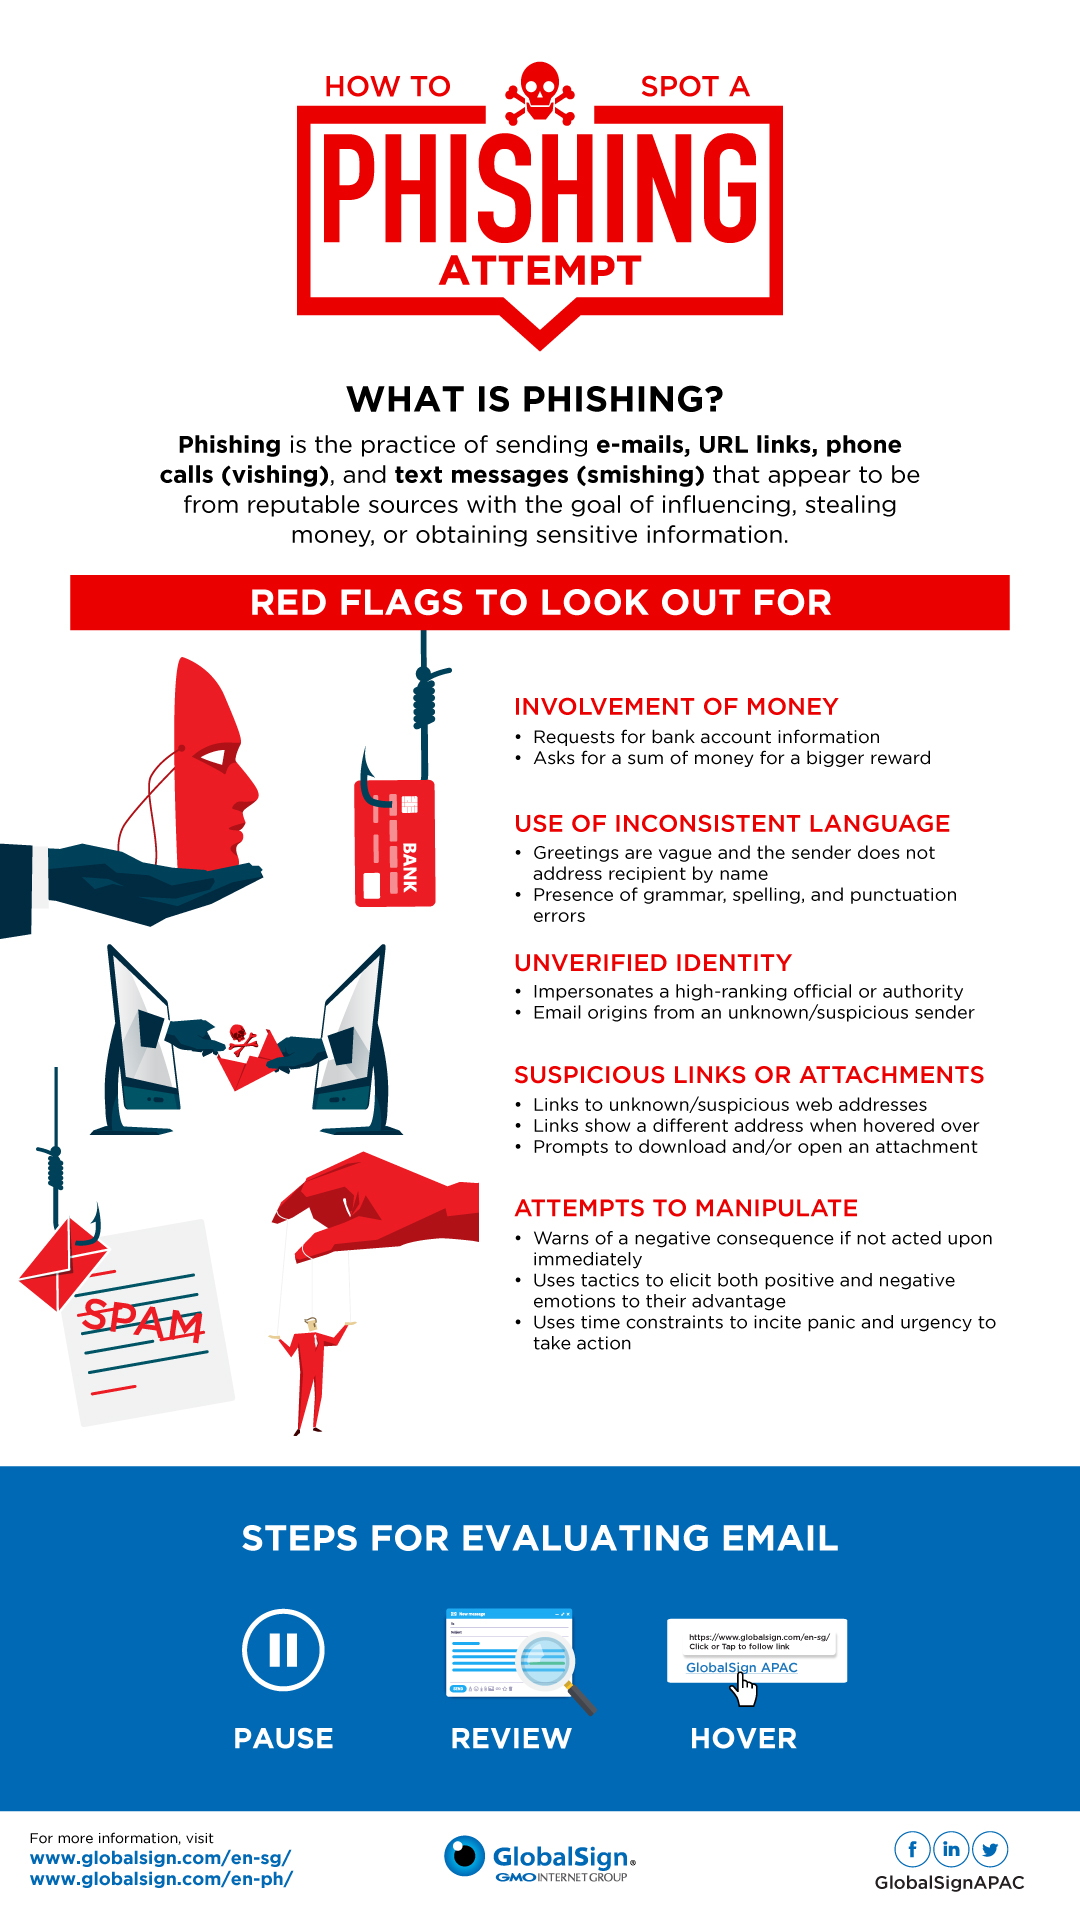 How to spot a phishing attempt infographic.jpg